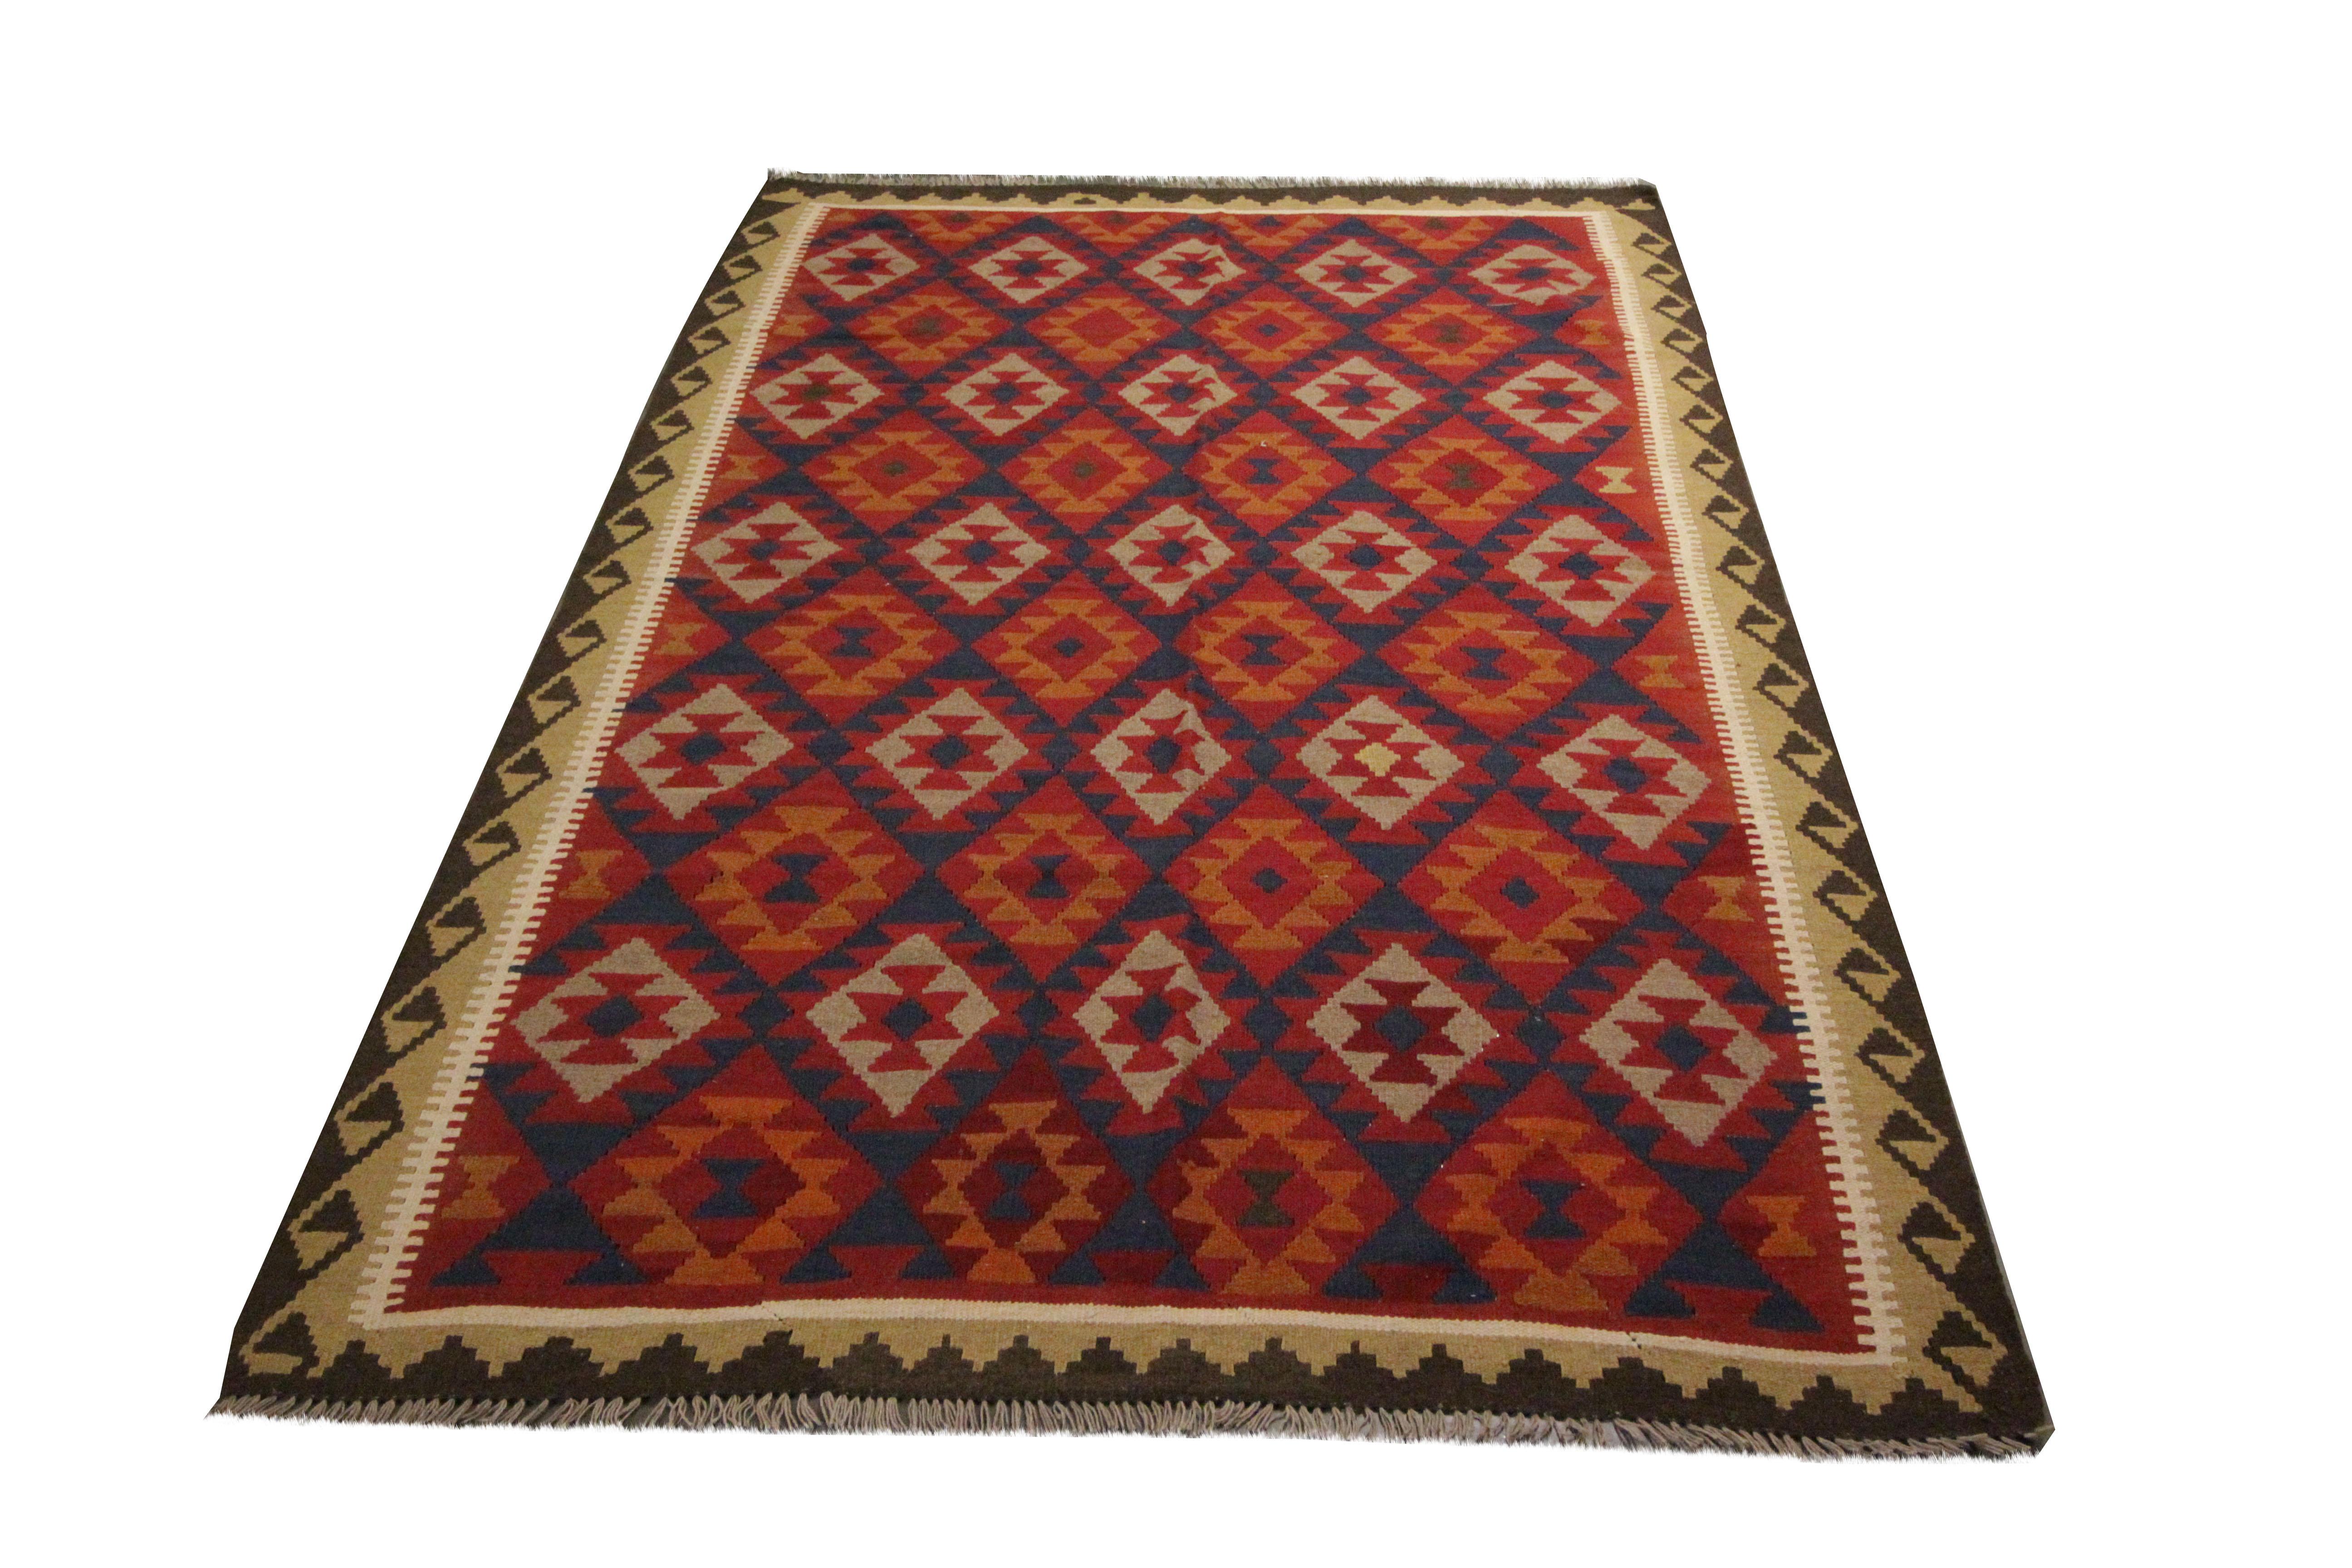 Woven with elegance, this wool kilim rug is sure to uplift any room. The design features an energetic geometric pattern woven with a diamond pattern in orange, blue, and red accents. Both the colours and patterns in this piece make it sure to lift